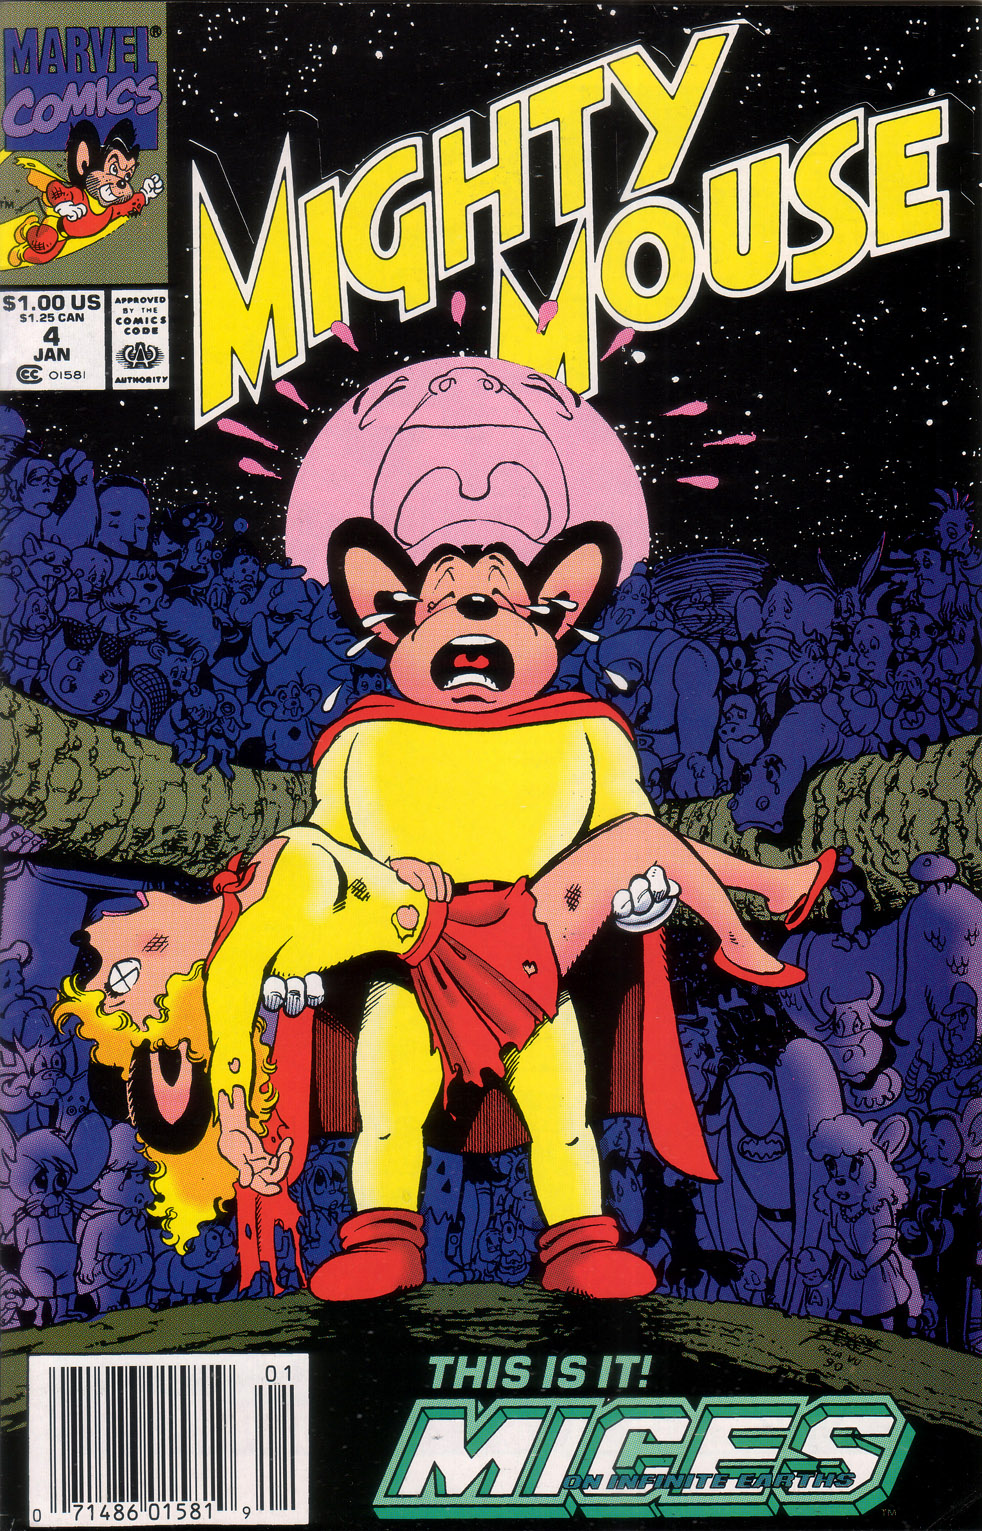 Mighty Mouse Issue 4 | Read Mighty Mouse Issue 4 comic online in high  quality. Read Full Comic online for free - Read comics online in high  quality .